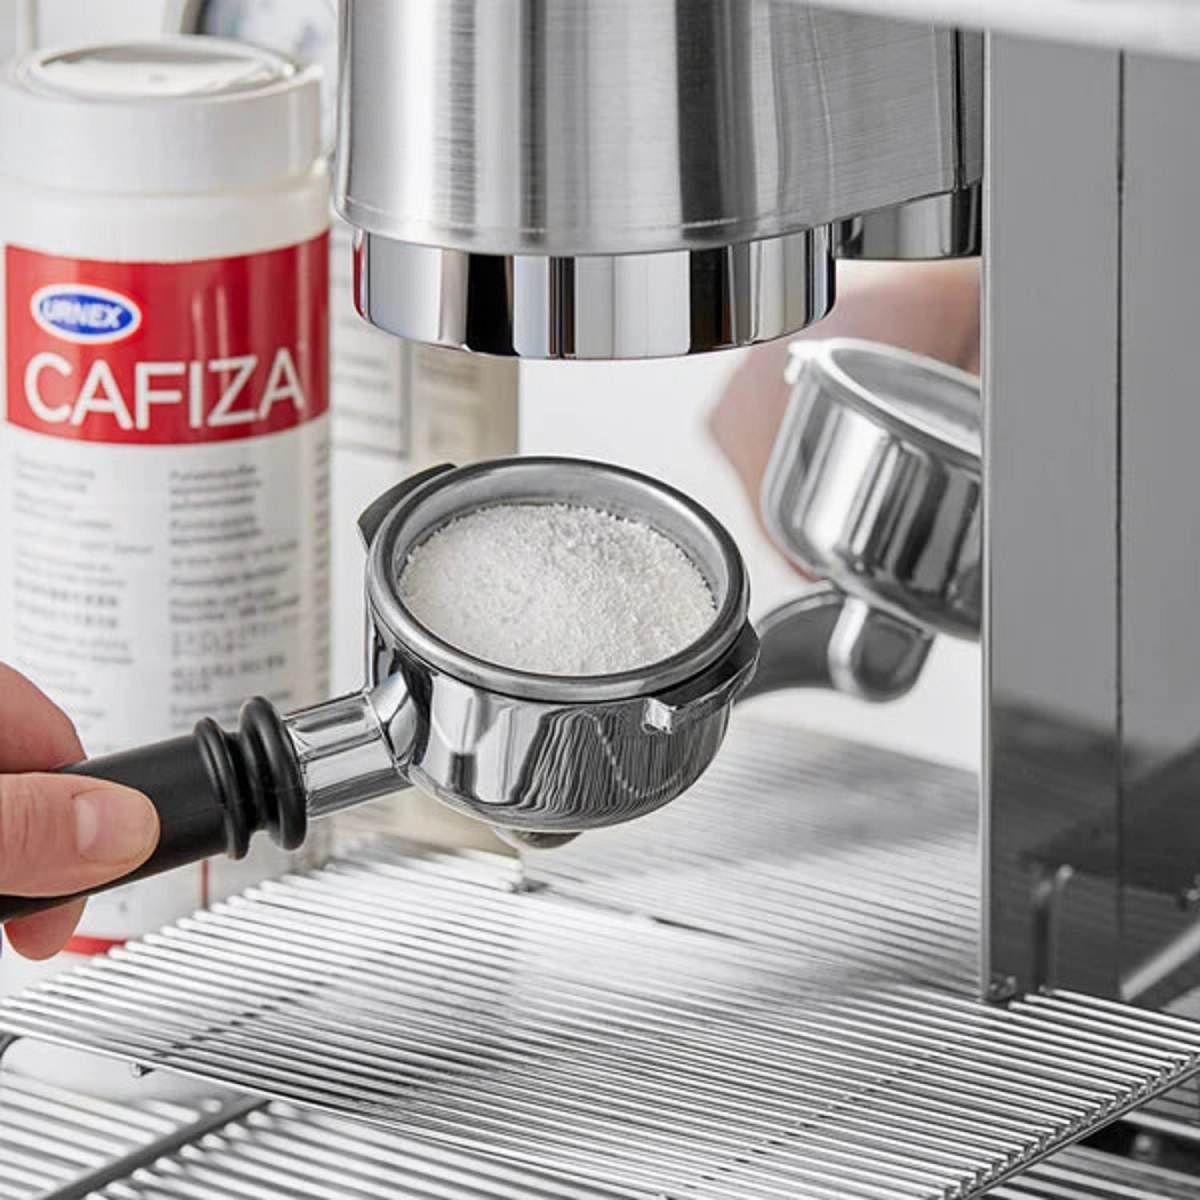 How To Clean An Espresso Machine With Cafiza